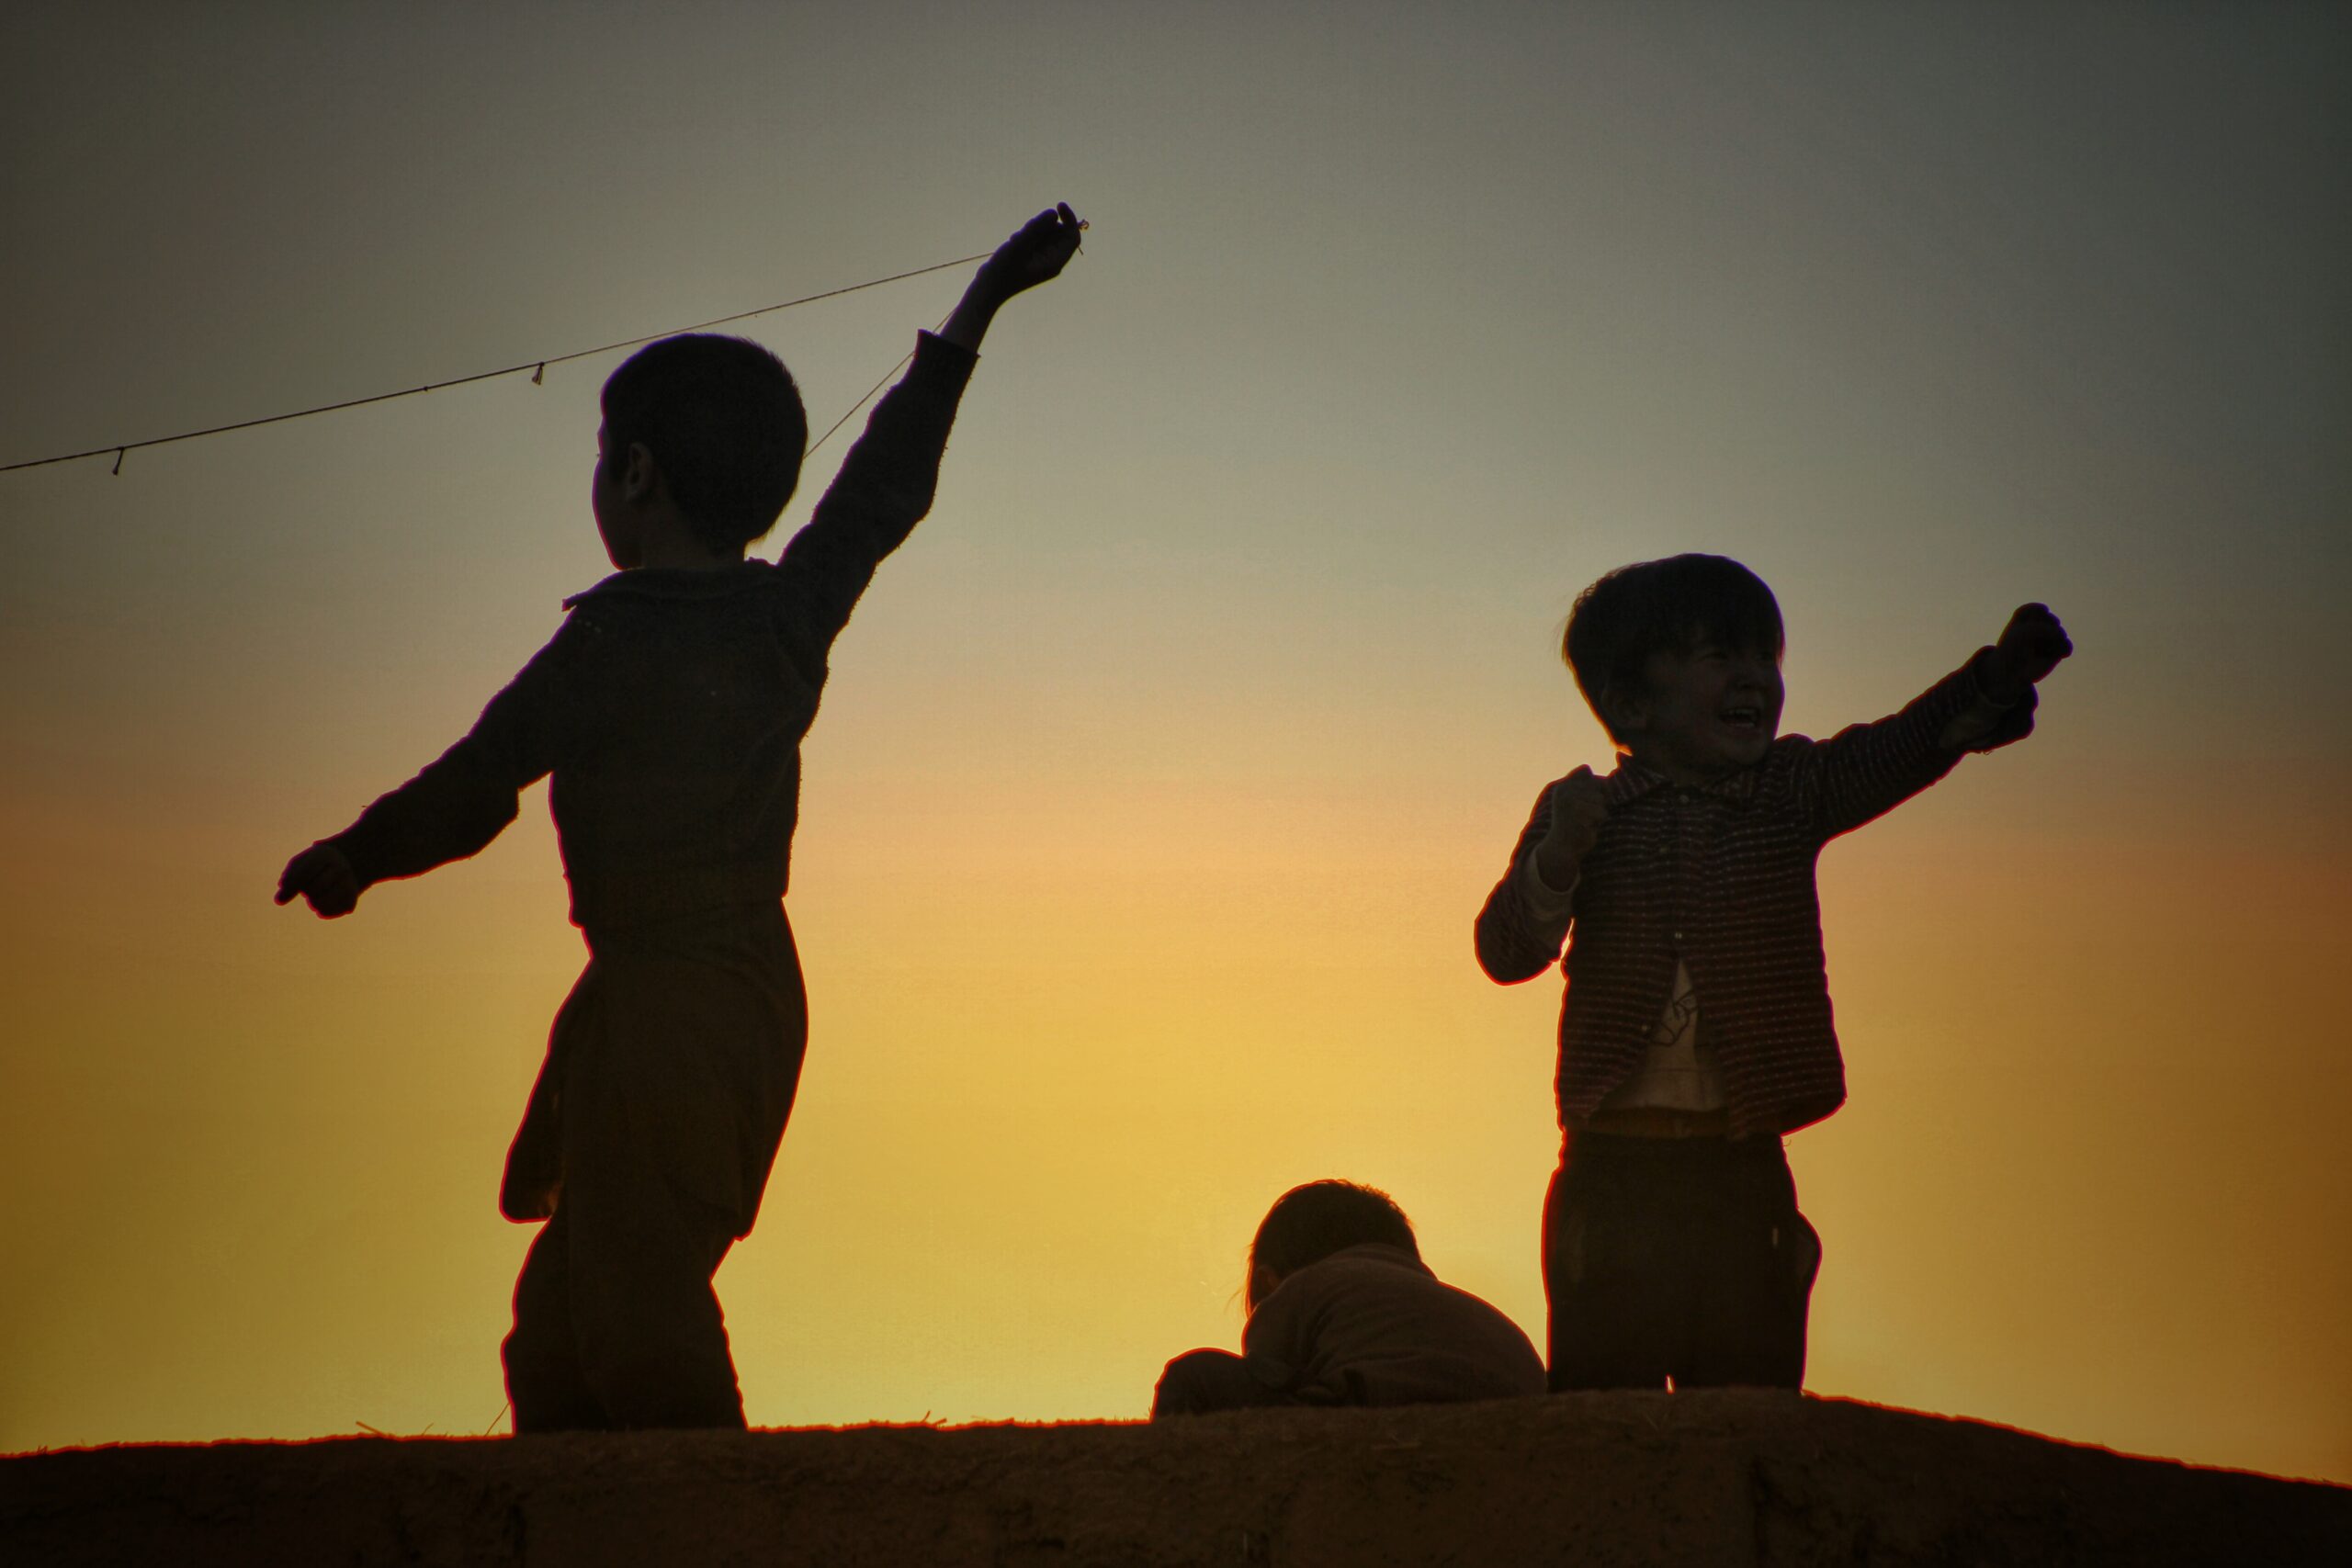 Children playing in the park, sunset background.